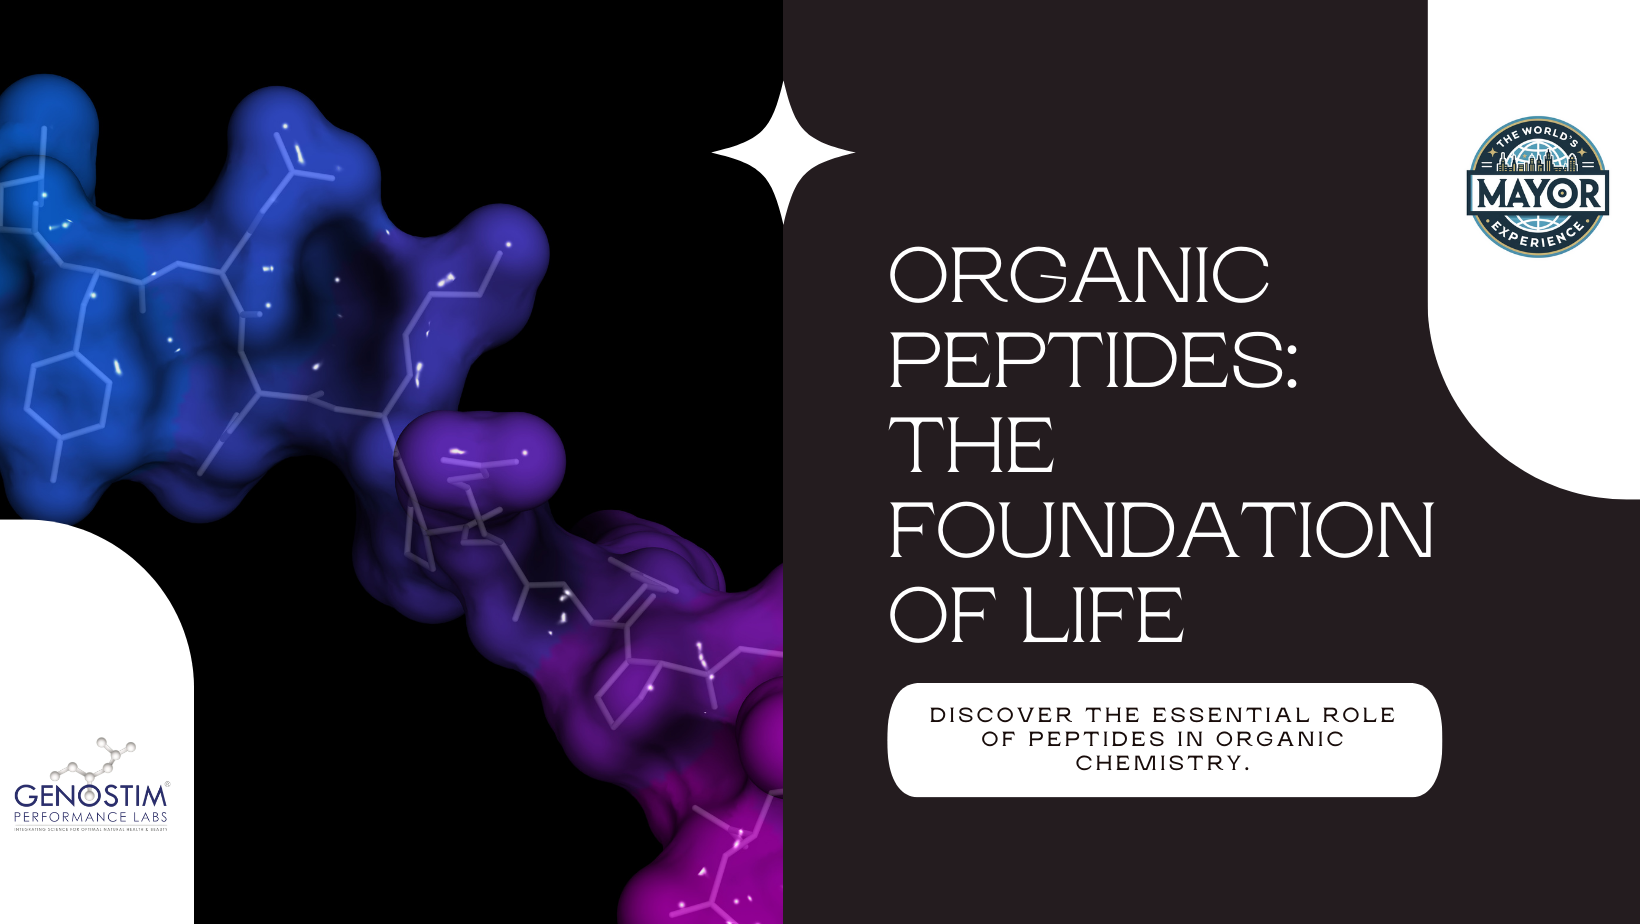 Organic peptides are more than just a buzzword in the worlds of science, health, and beauty—they're 